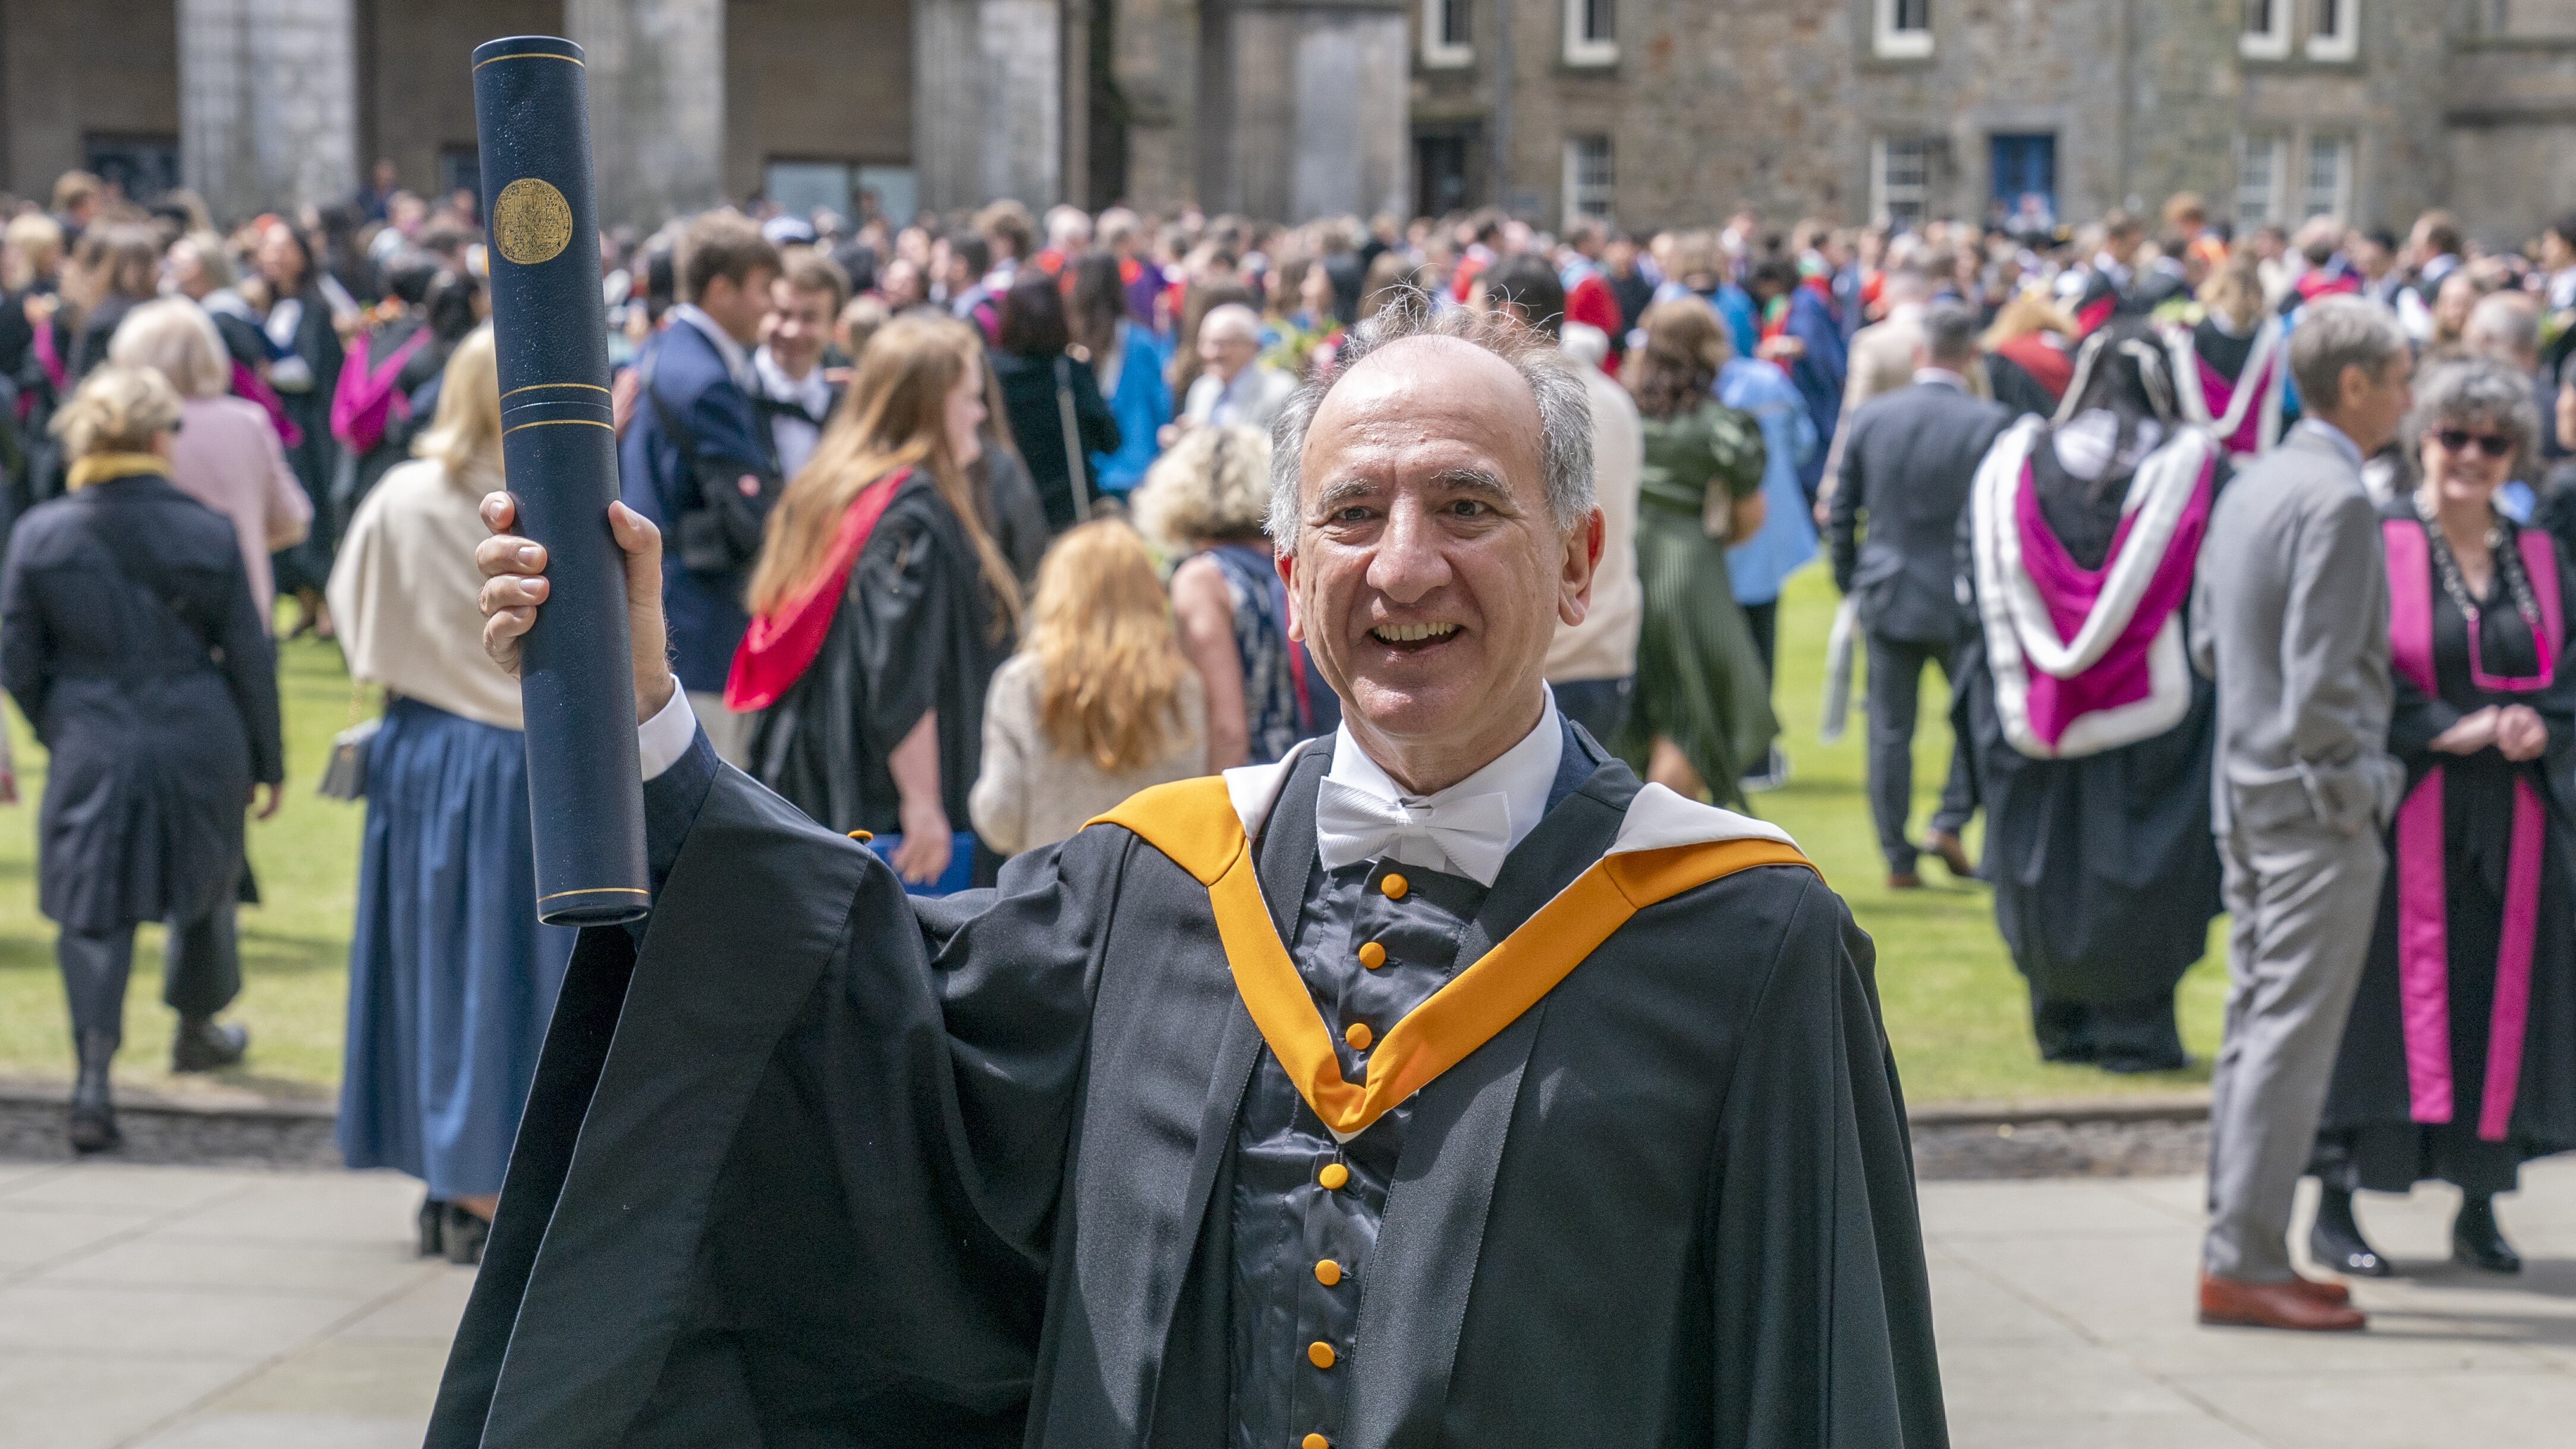 The Thick of It creator Armando Iannucci has received and honorary degree